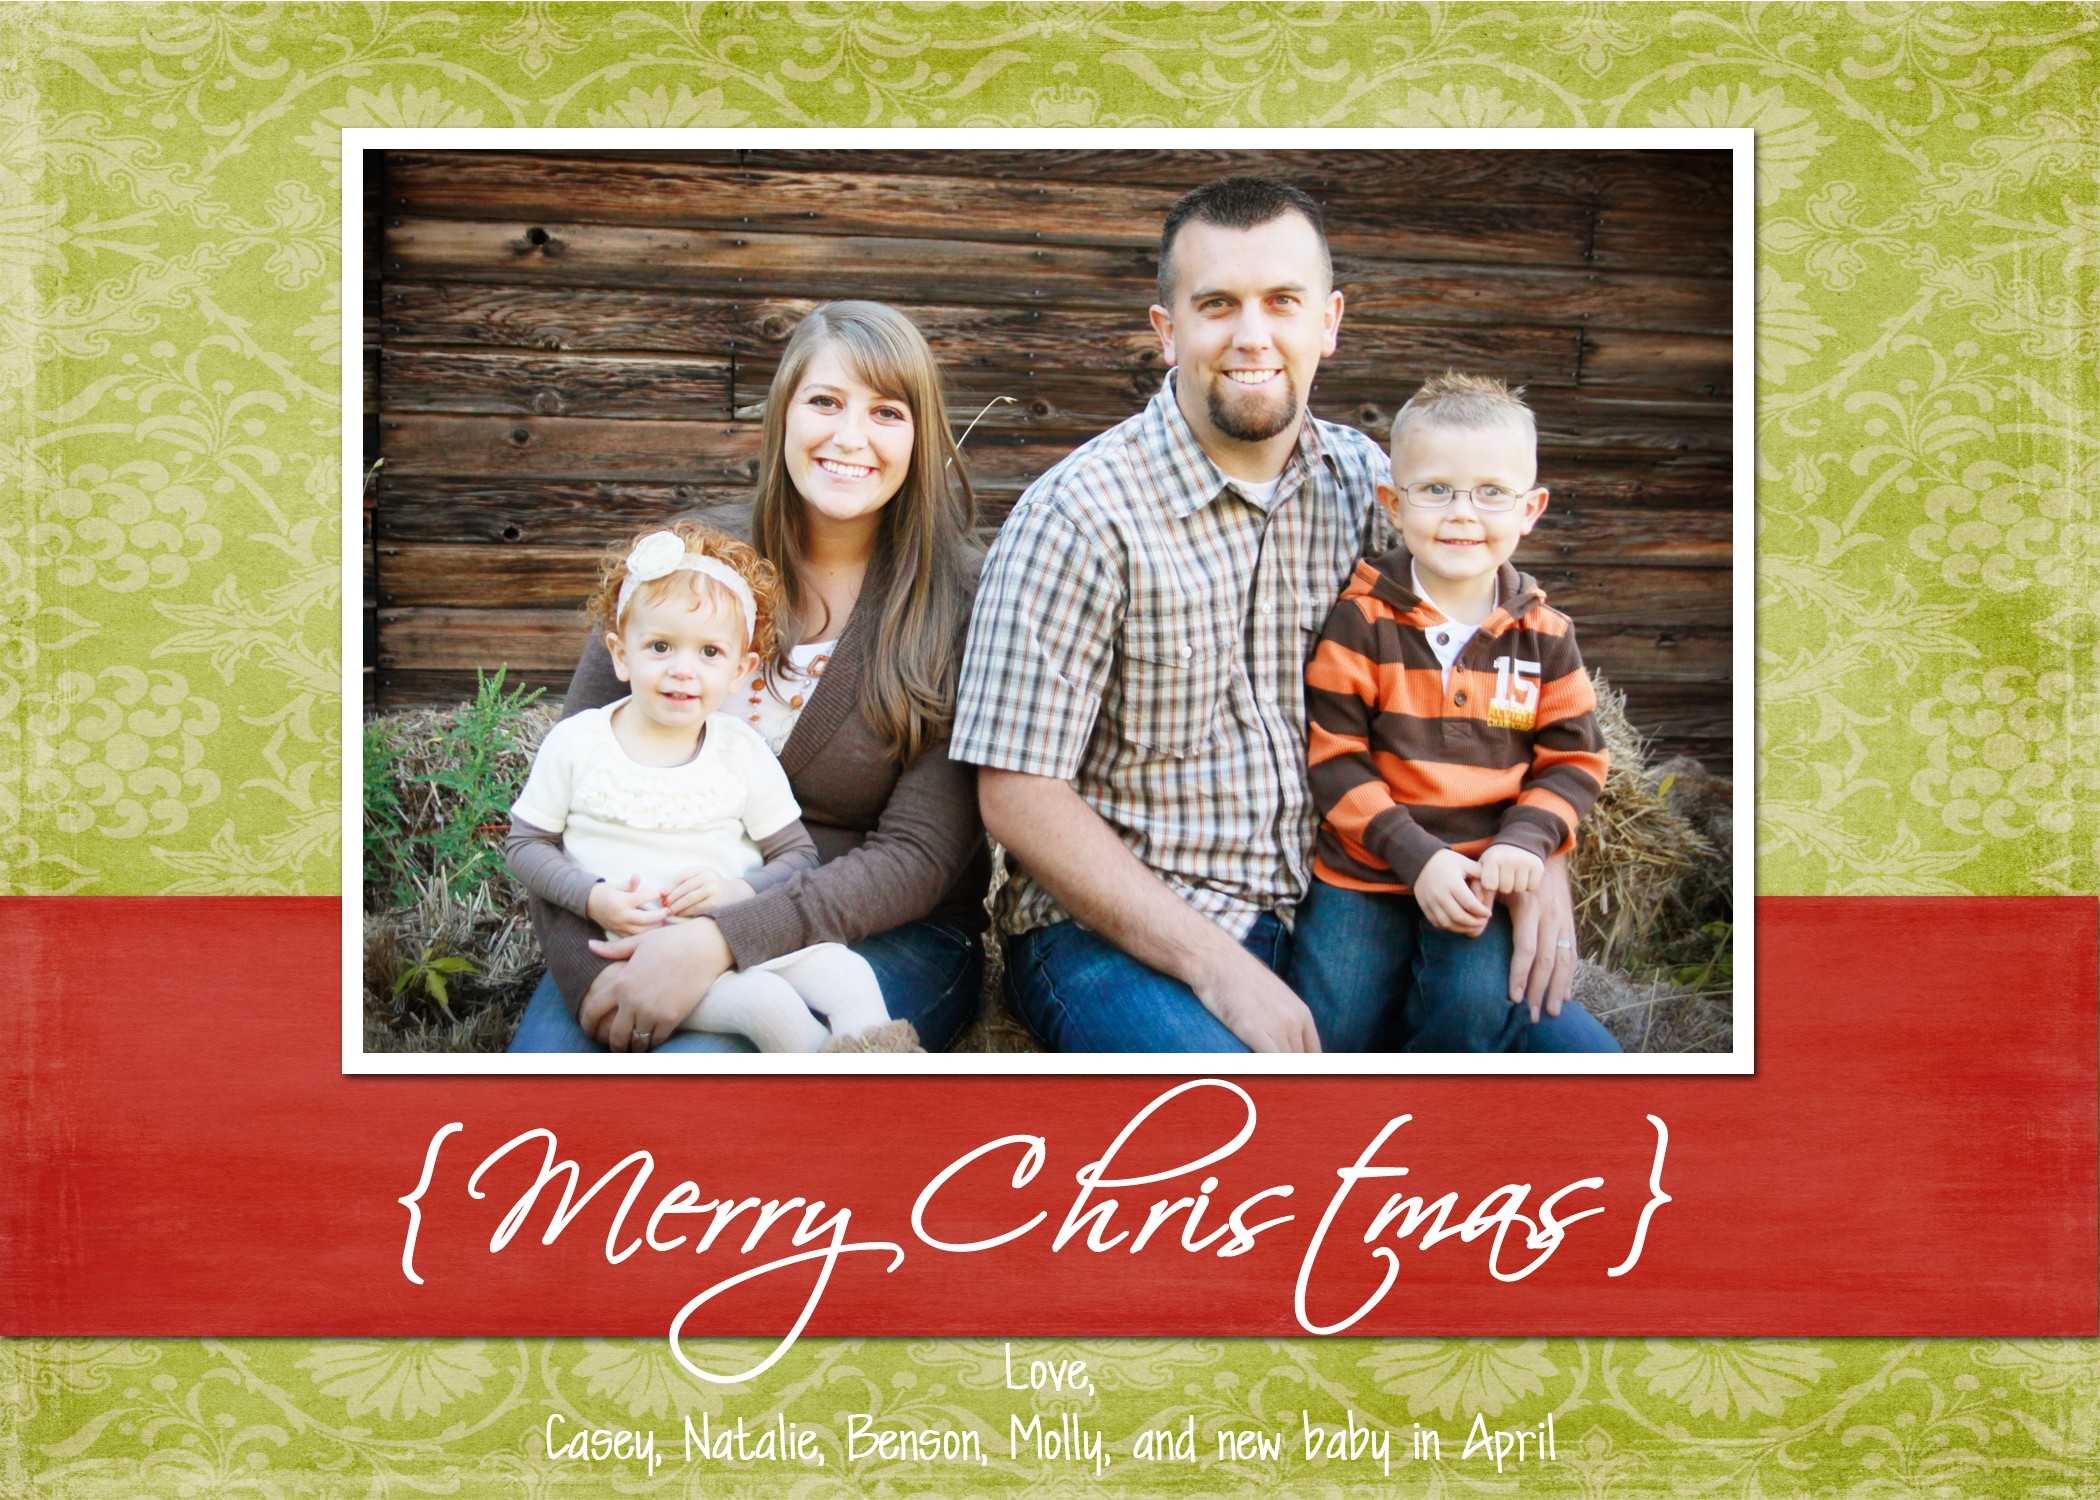 Christmas Card Templates Photoshop Free Download Penaime Intended For Free Christmas Card Templates For Photoshop